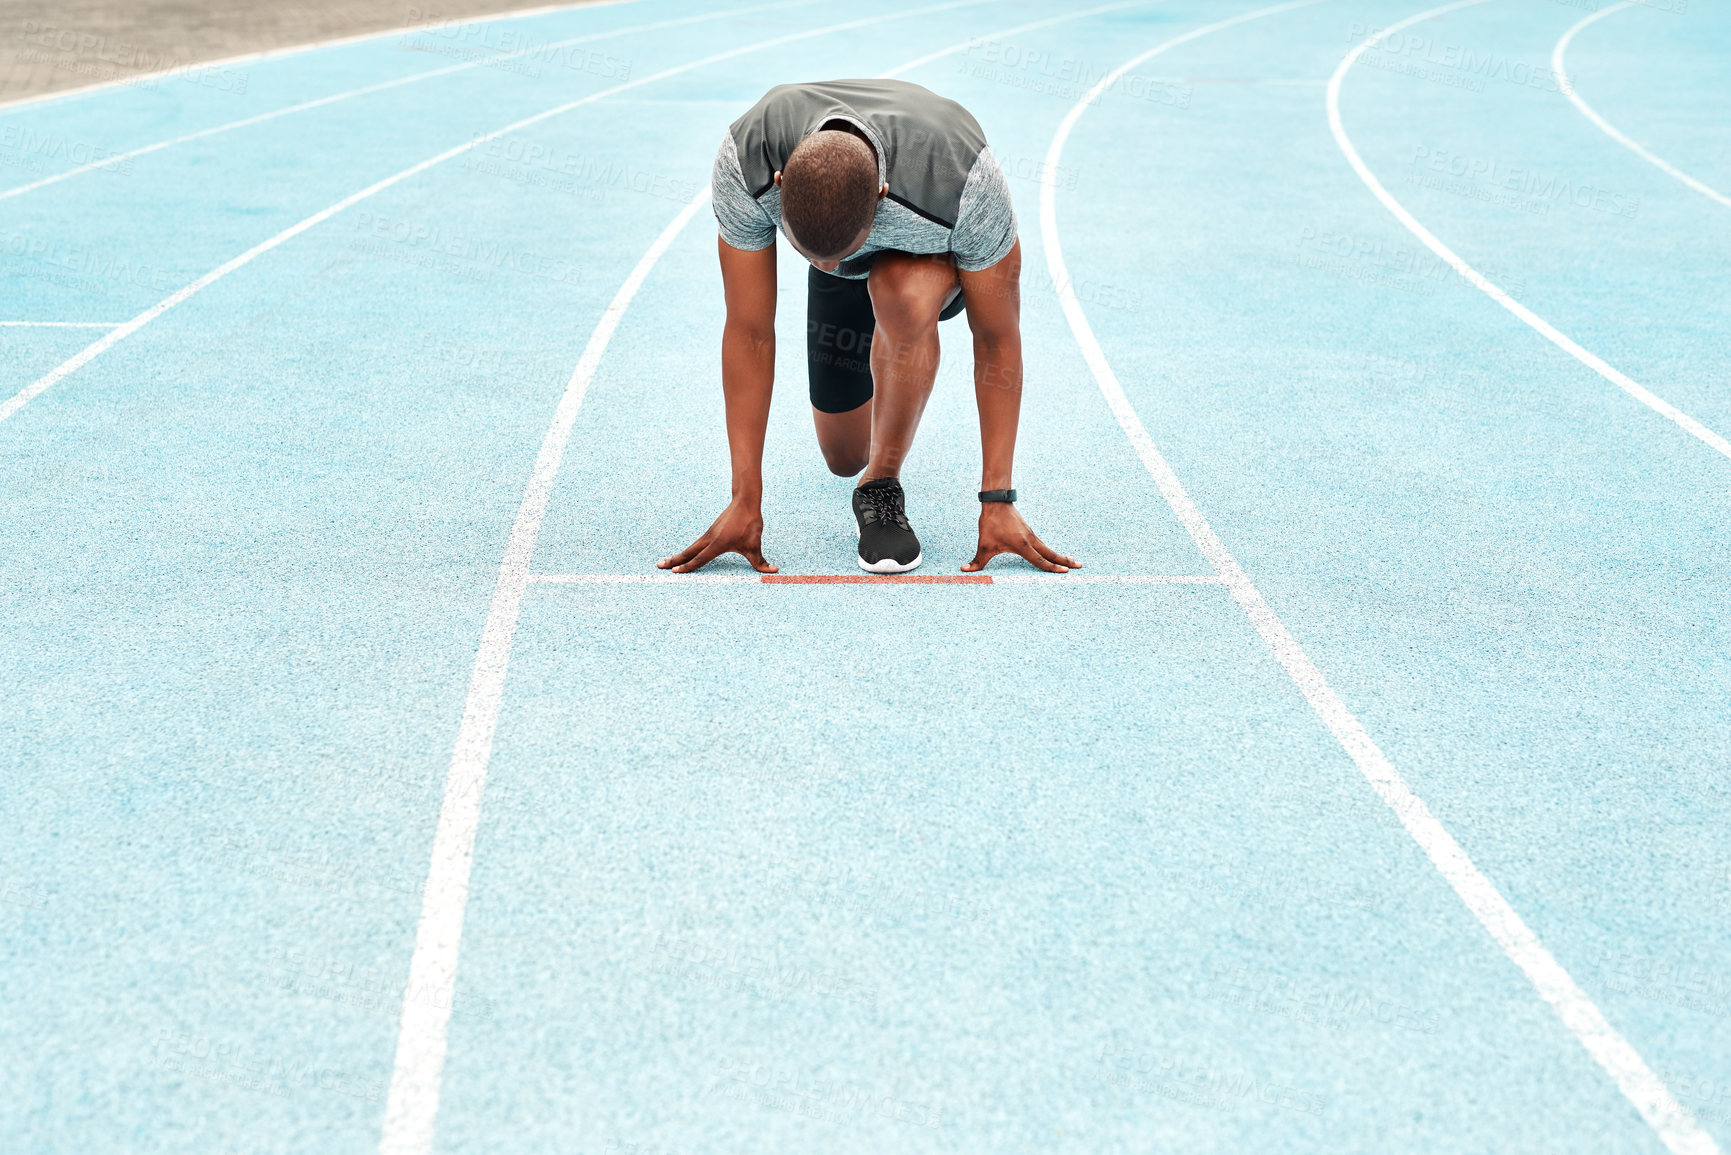 Buy stock photo Full length shot of an unrecognizable athlete crouching down and preparing to sprint along a track during a training session